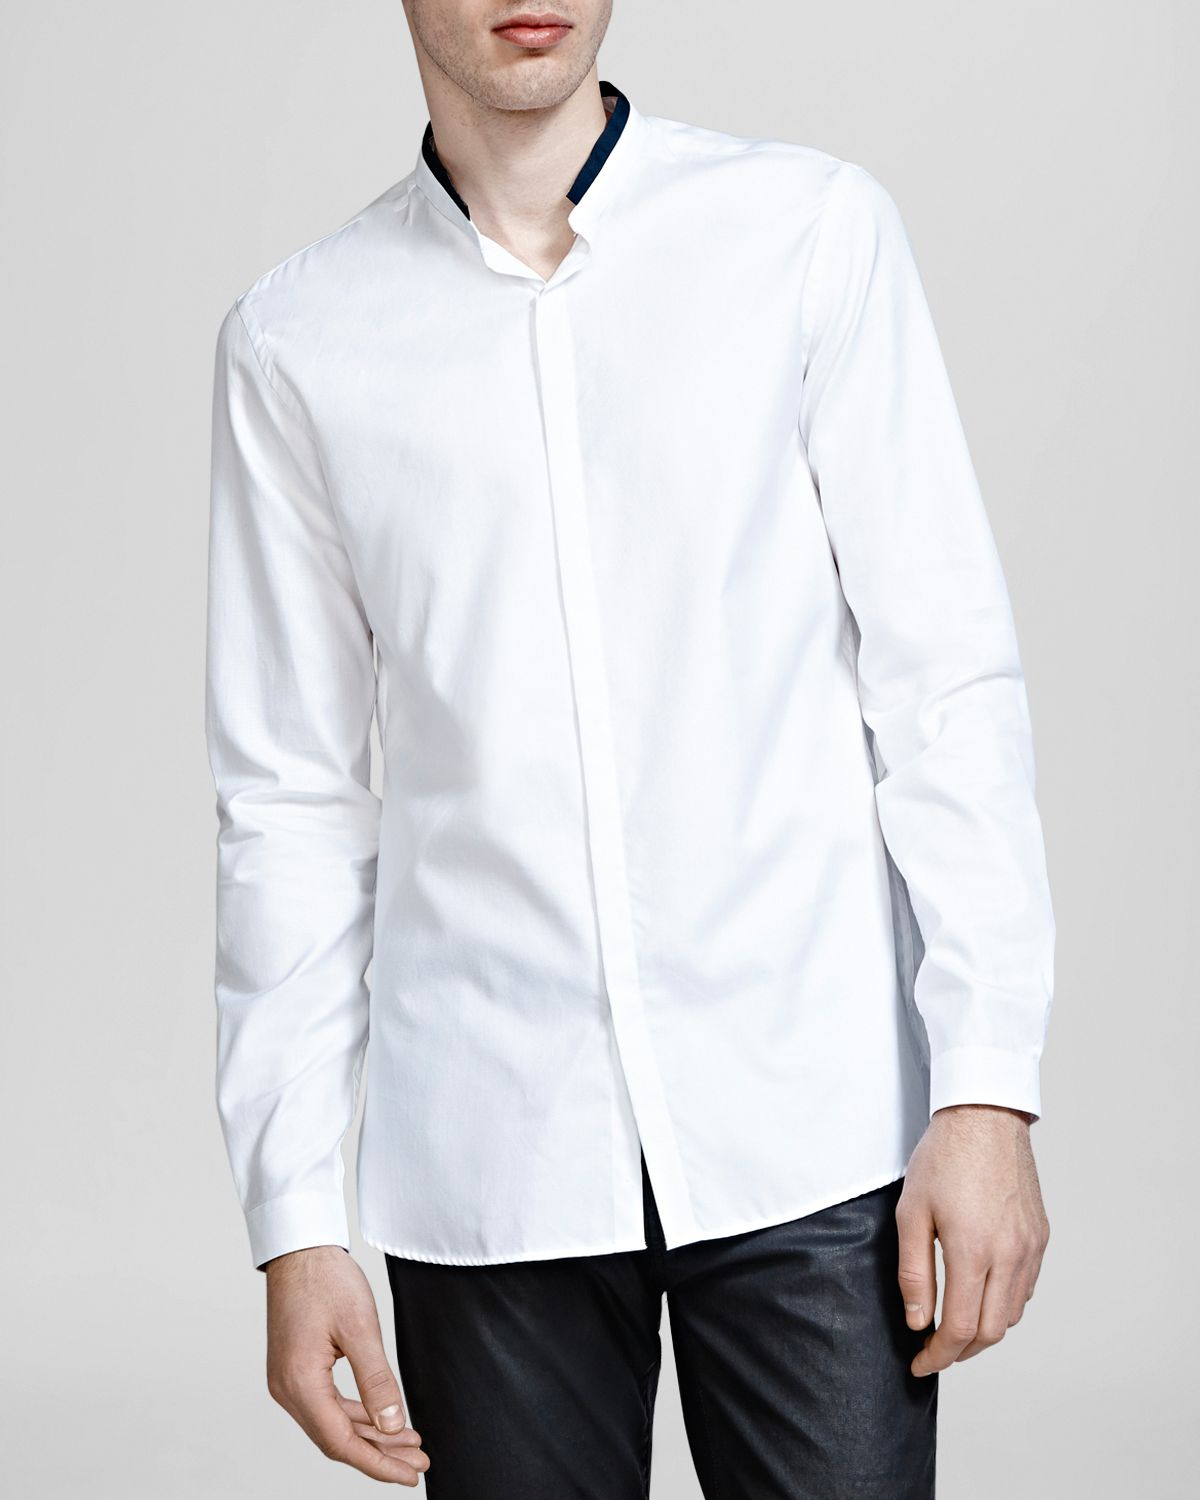 The Kooples Mens Mens Long-Sleeved Button-Down Shirt with a Classic Collar and Relaxed Fit